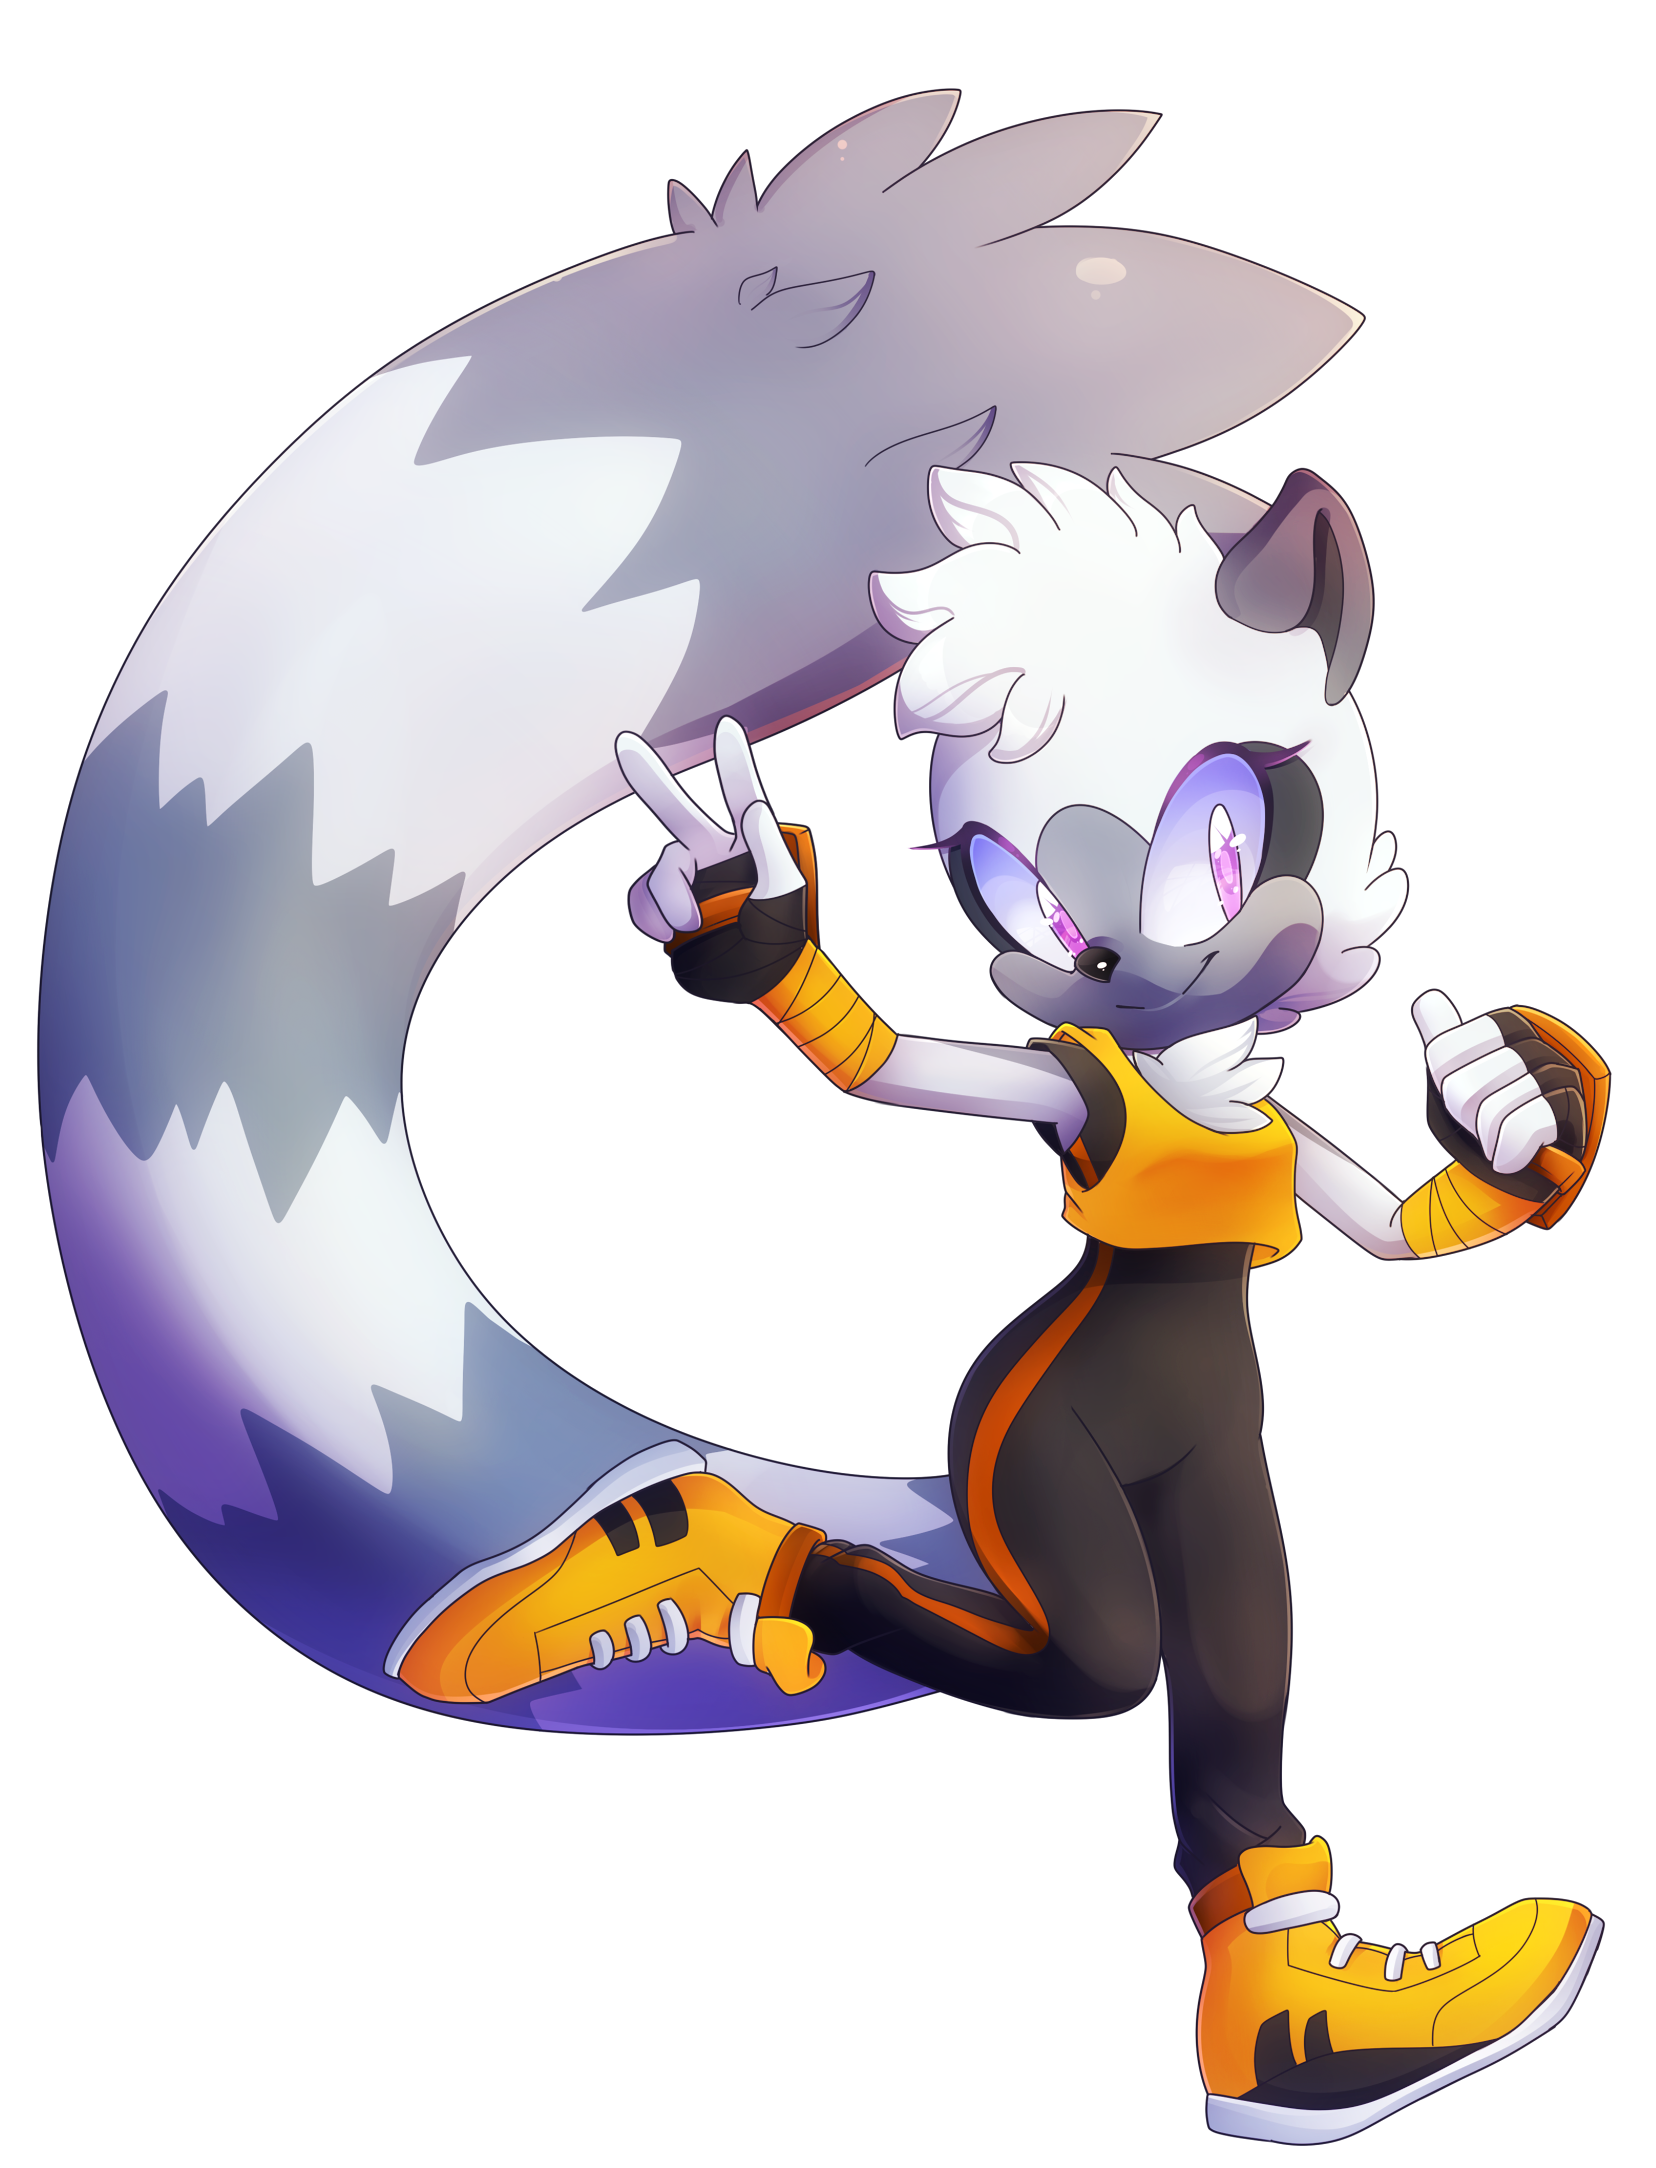 Tangle The Lemur Sprite Sheet, She was first revealed on ign.com on january 2018